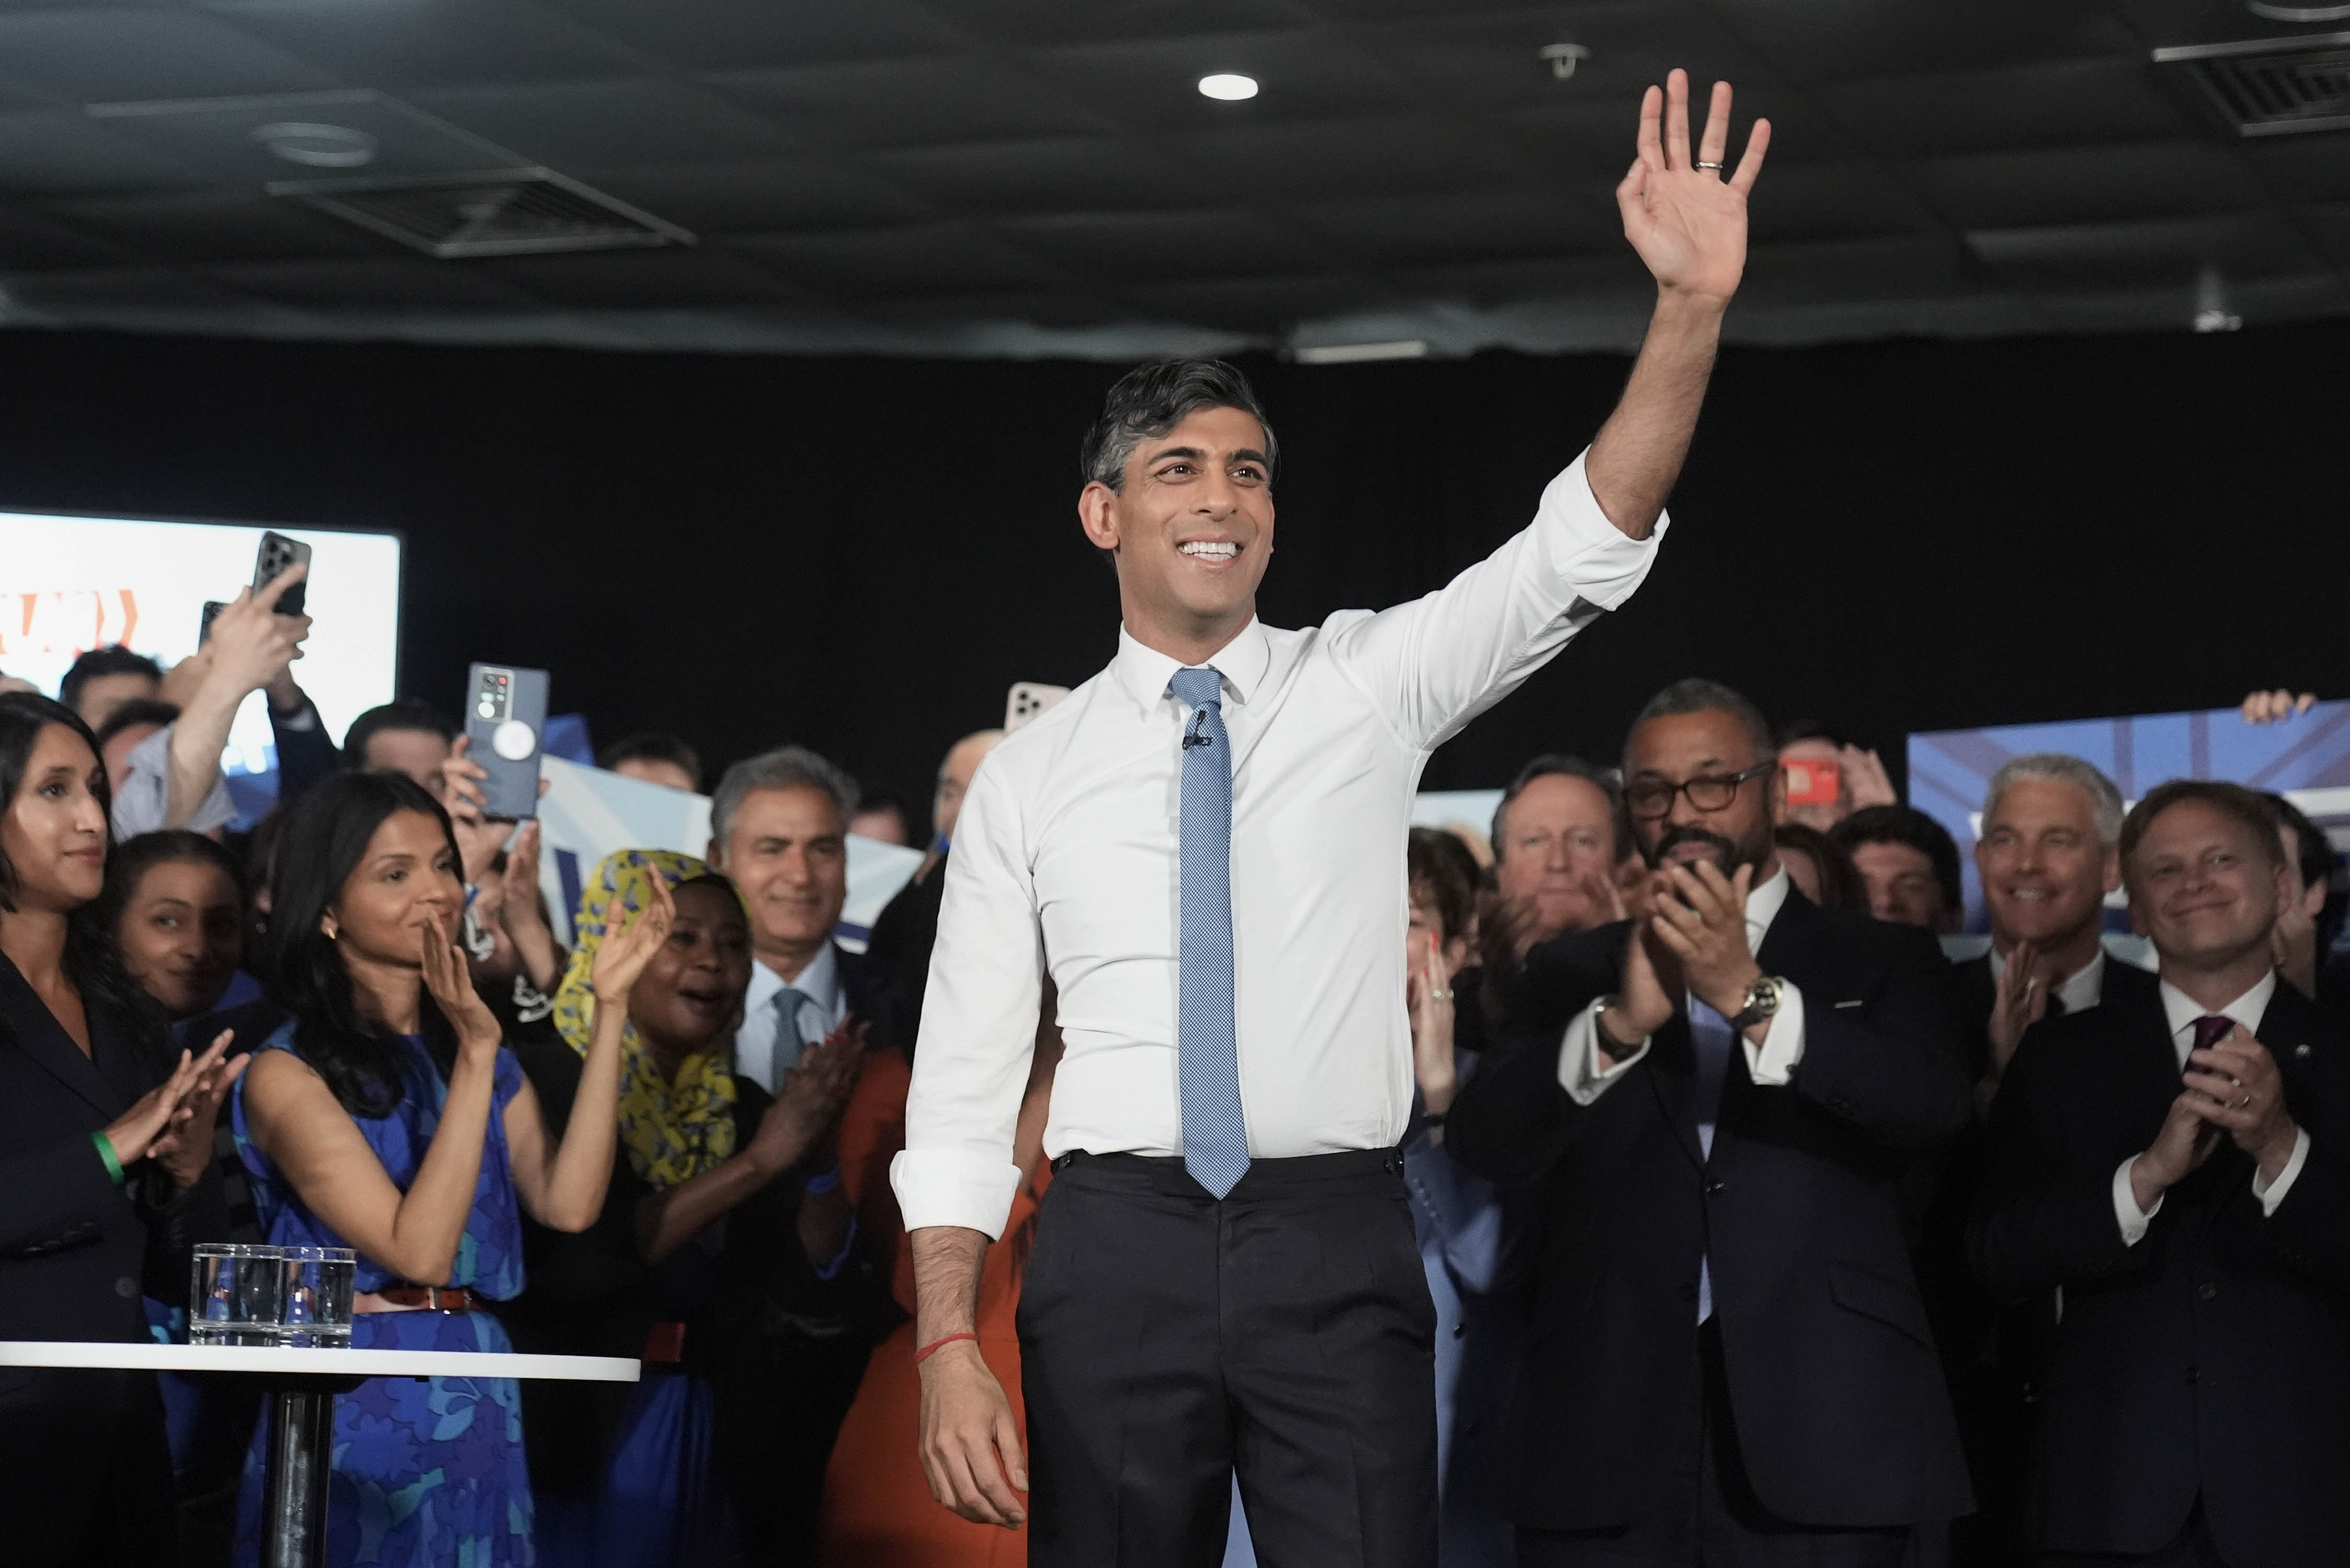 Rishi Sunak launched his campaign on Wednesday night